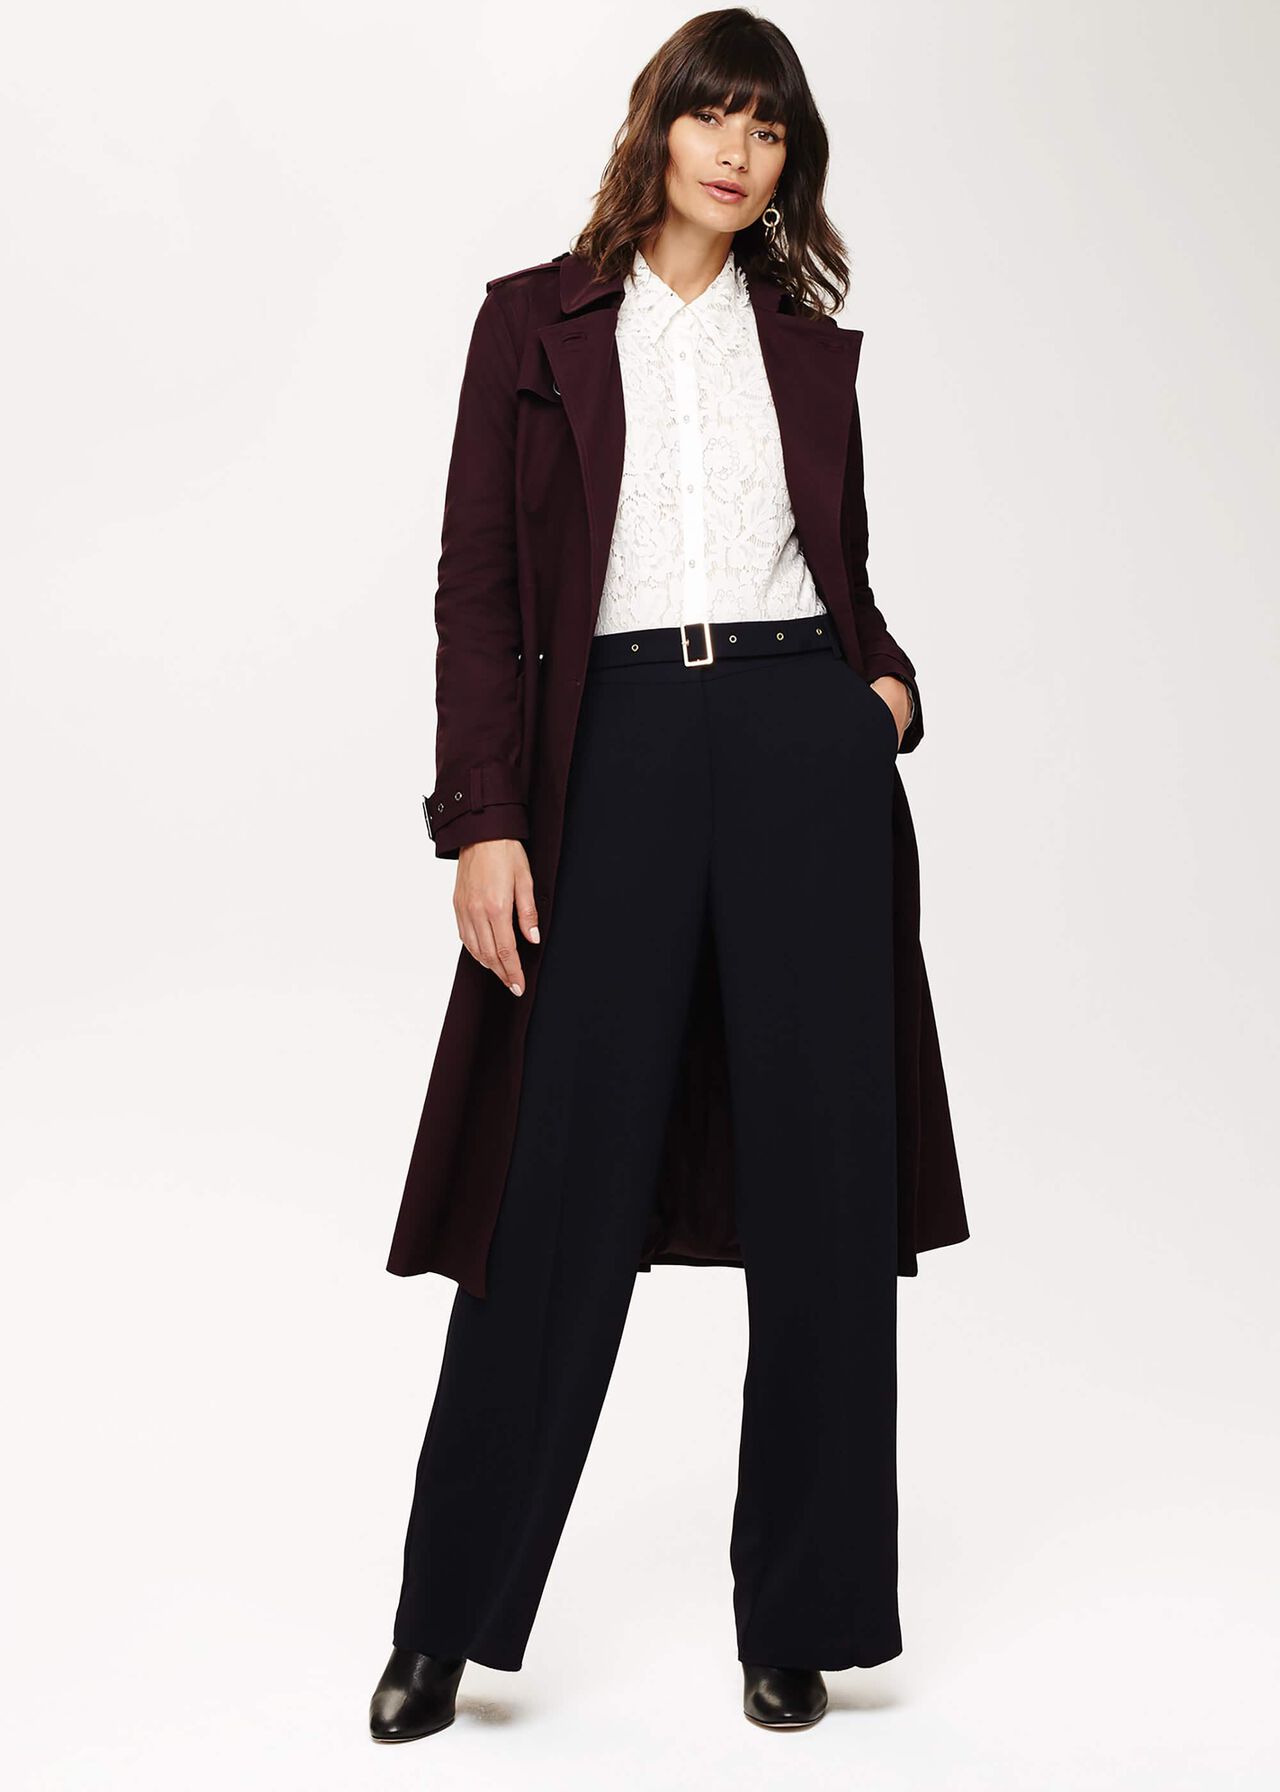 Trudie Trench Coat | Phase Eight